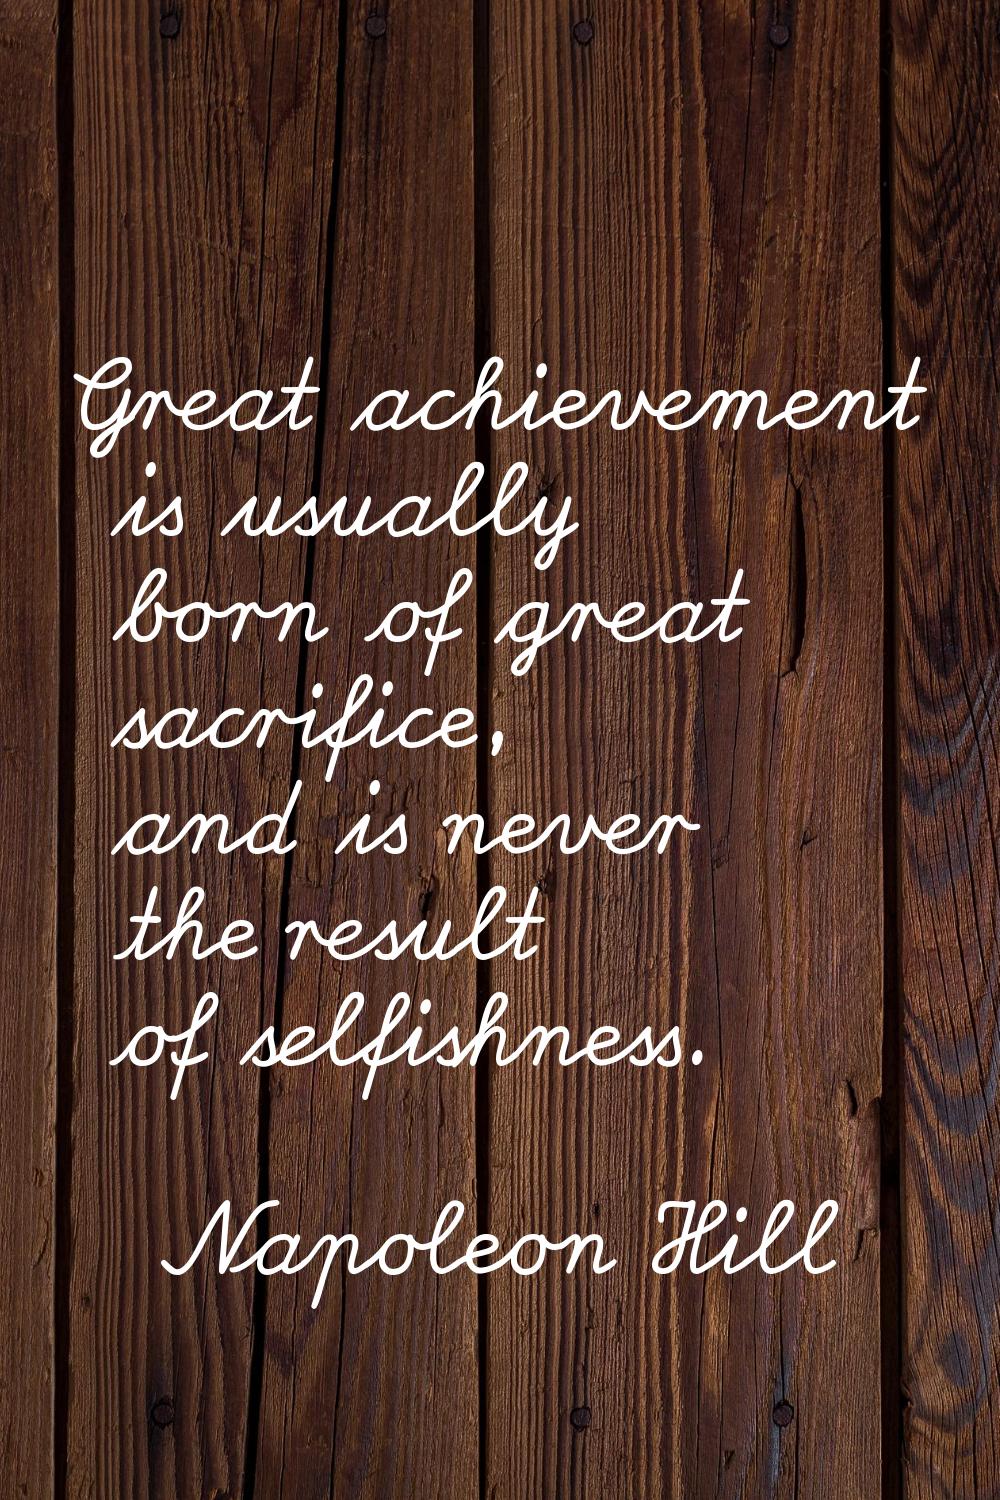 Great achievement is usually born of great sacrifice, and is never the result of selfishness.